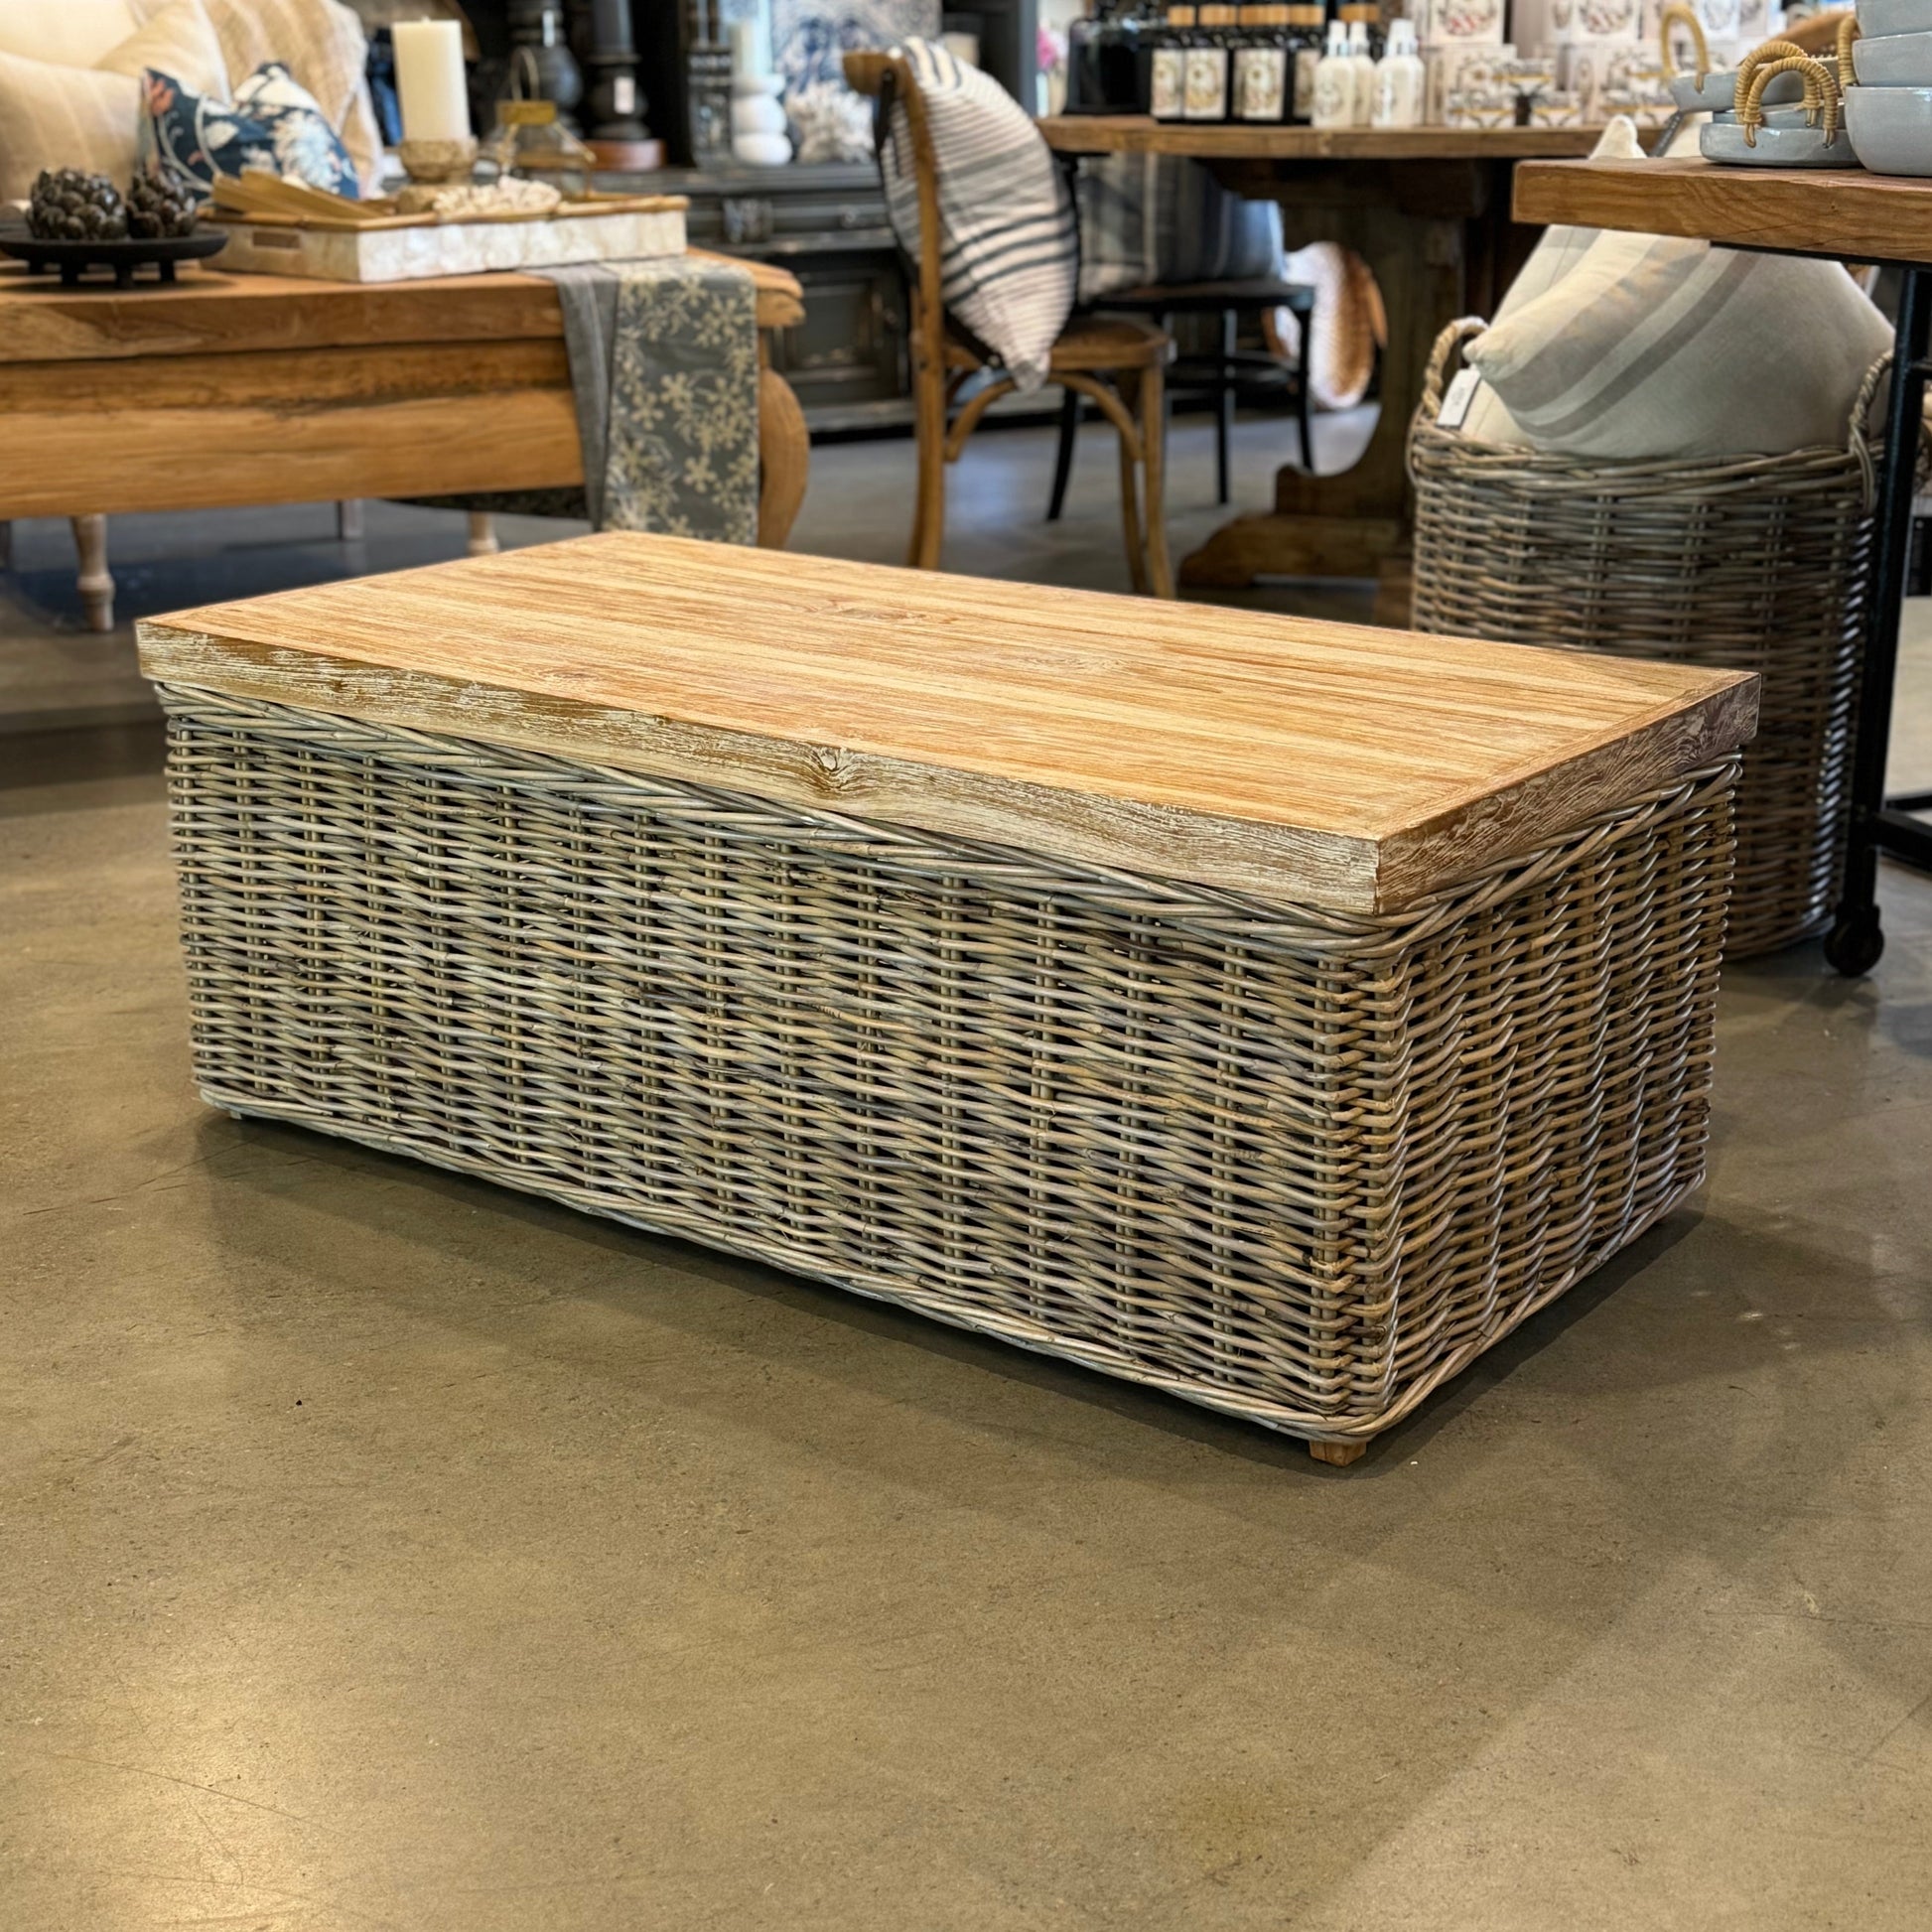 The Setiawan Coffee Table is a stunning addition to any room. The combination of rattan and rustic teak creates a unique and lively texture, enhanced by a delicate whitewash finish. This table brings a dynamic feel and personal touch to your living space. Front